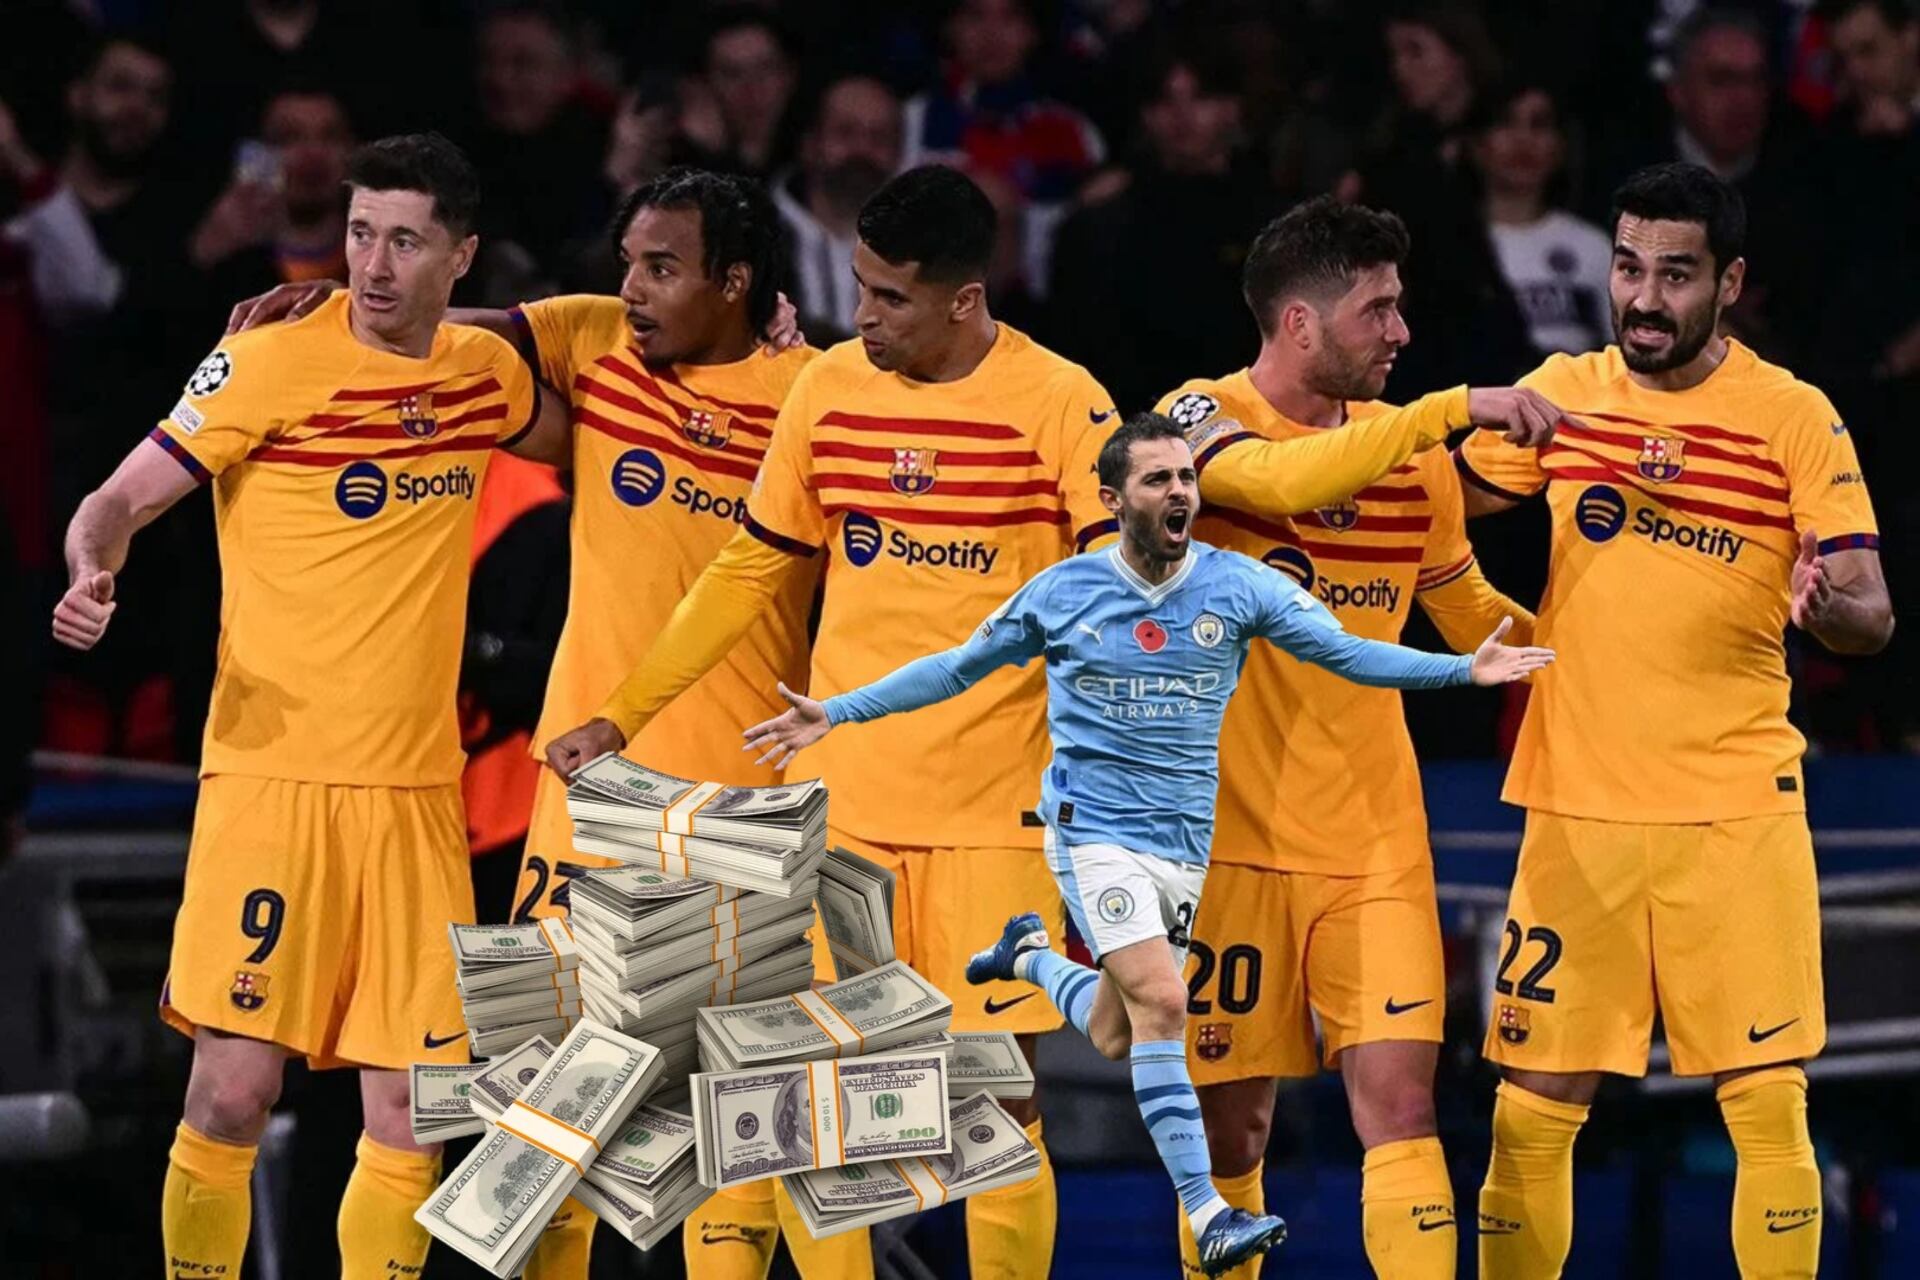 Not just bringing Silva from City, what Barcelona could do with prize money if they advance to UCL semifinals